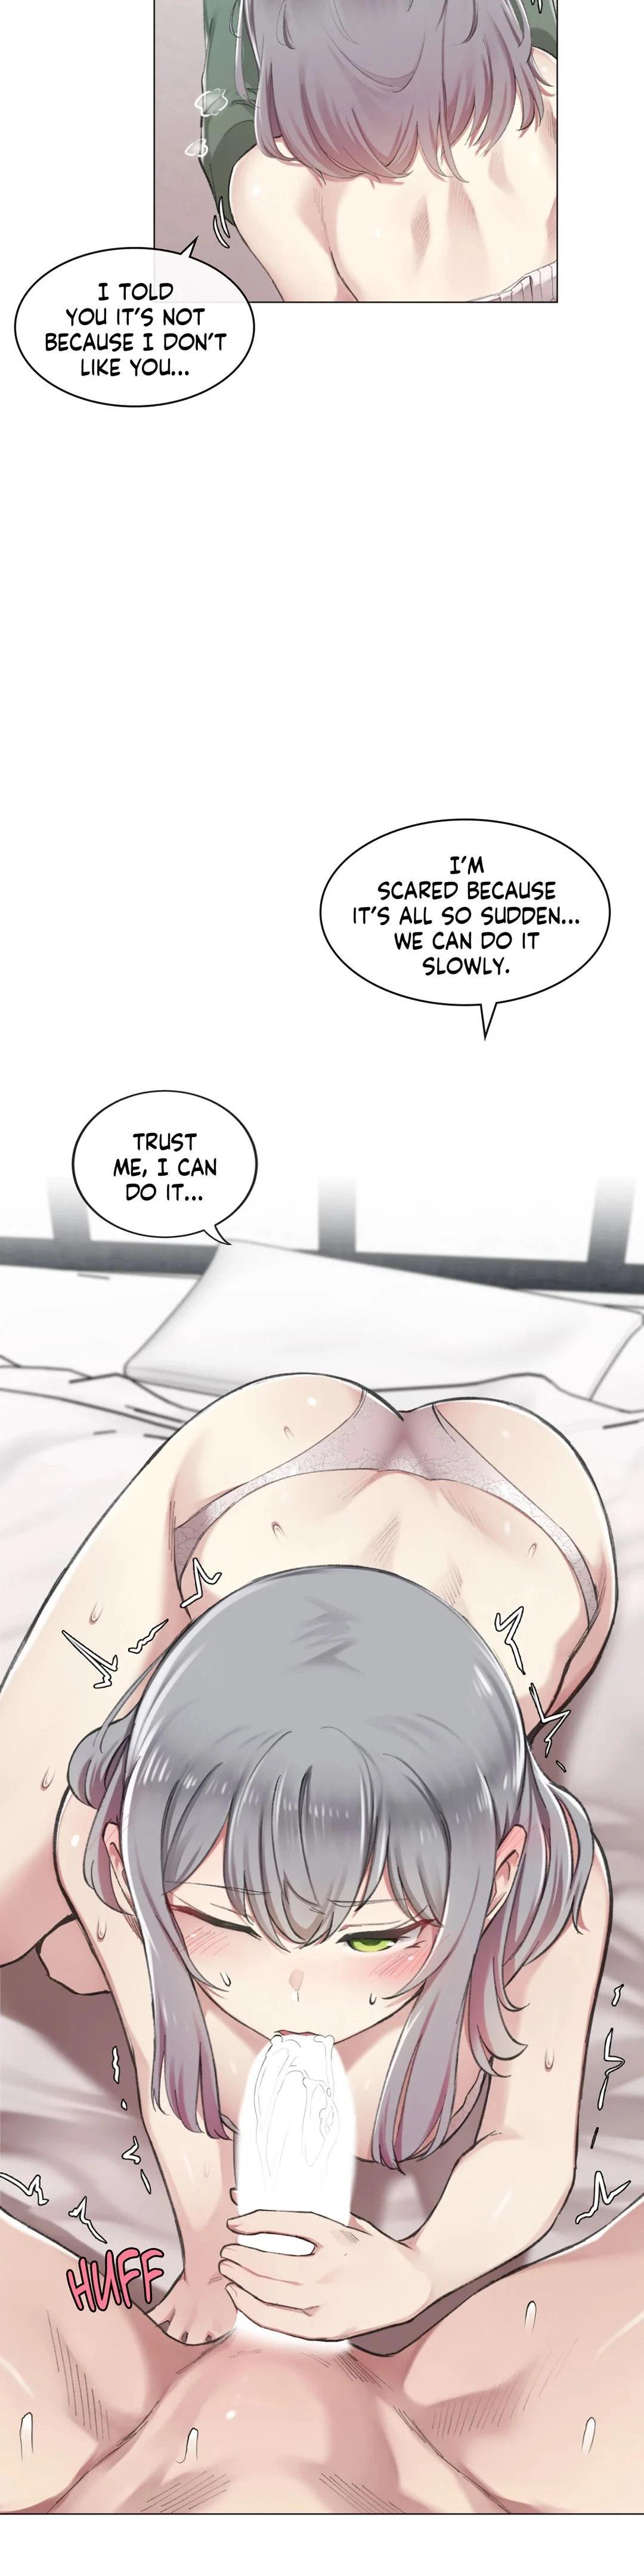 [Dumangoon, KONG_] Sexcape Room: Snap Off Ch.7/7 [English] [Manhwa PDF] Completed 60